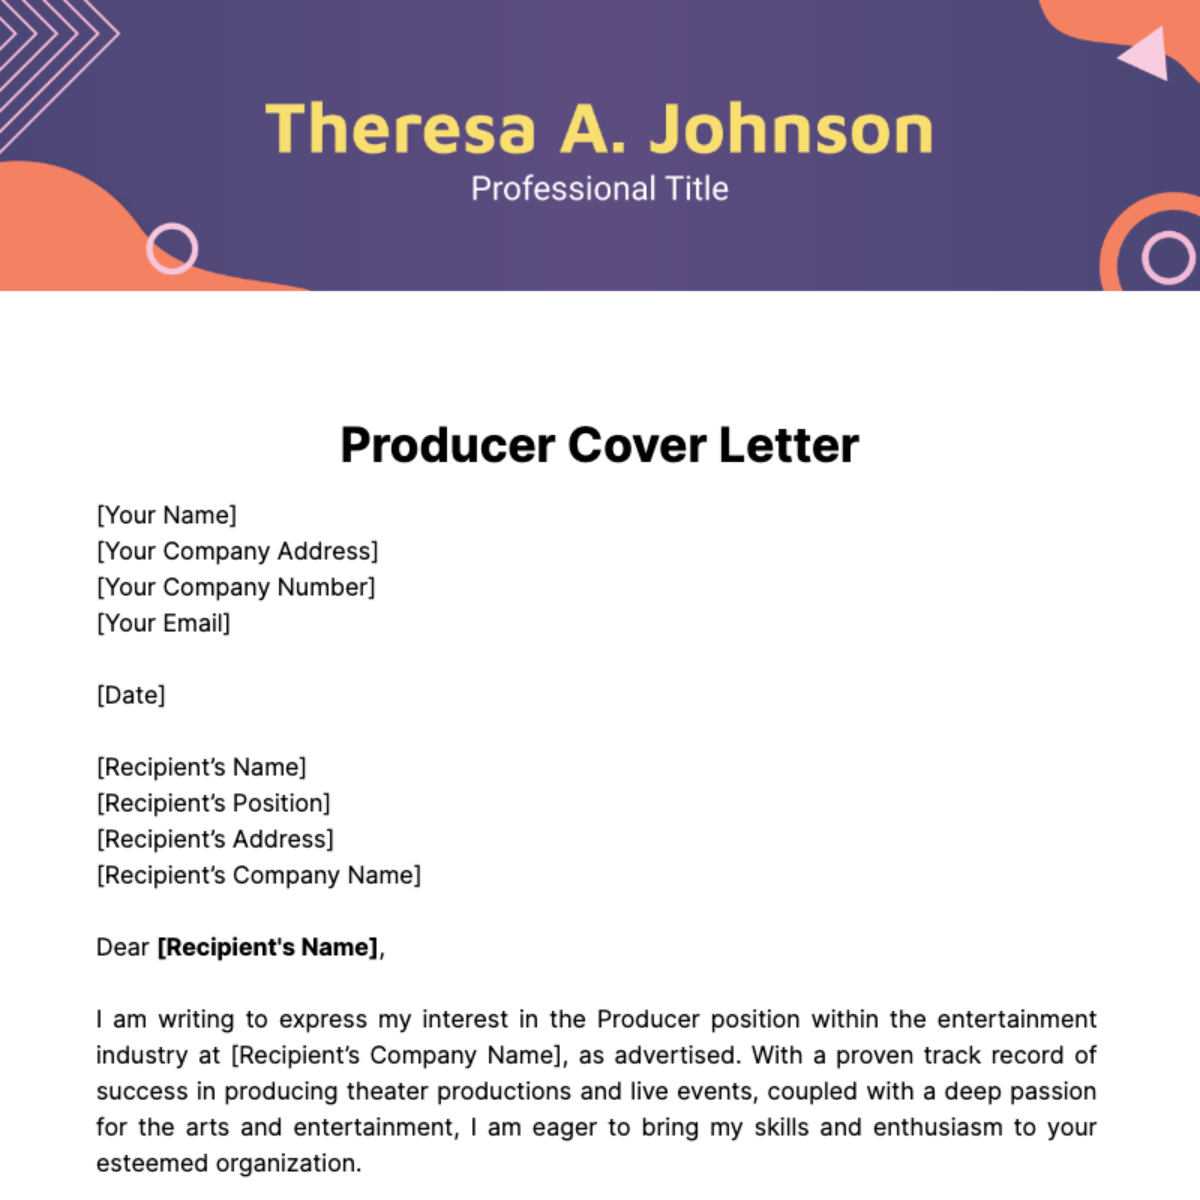 Producer Cover Letter Template